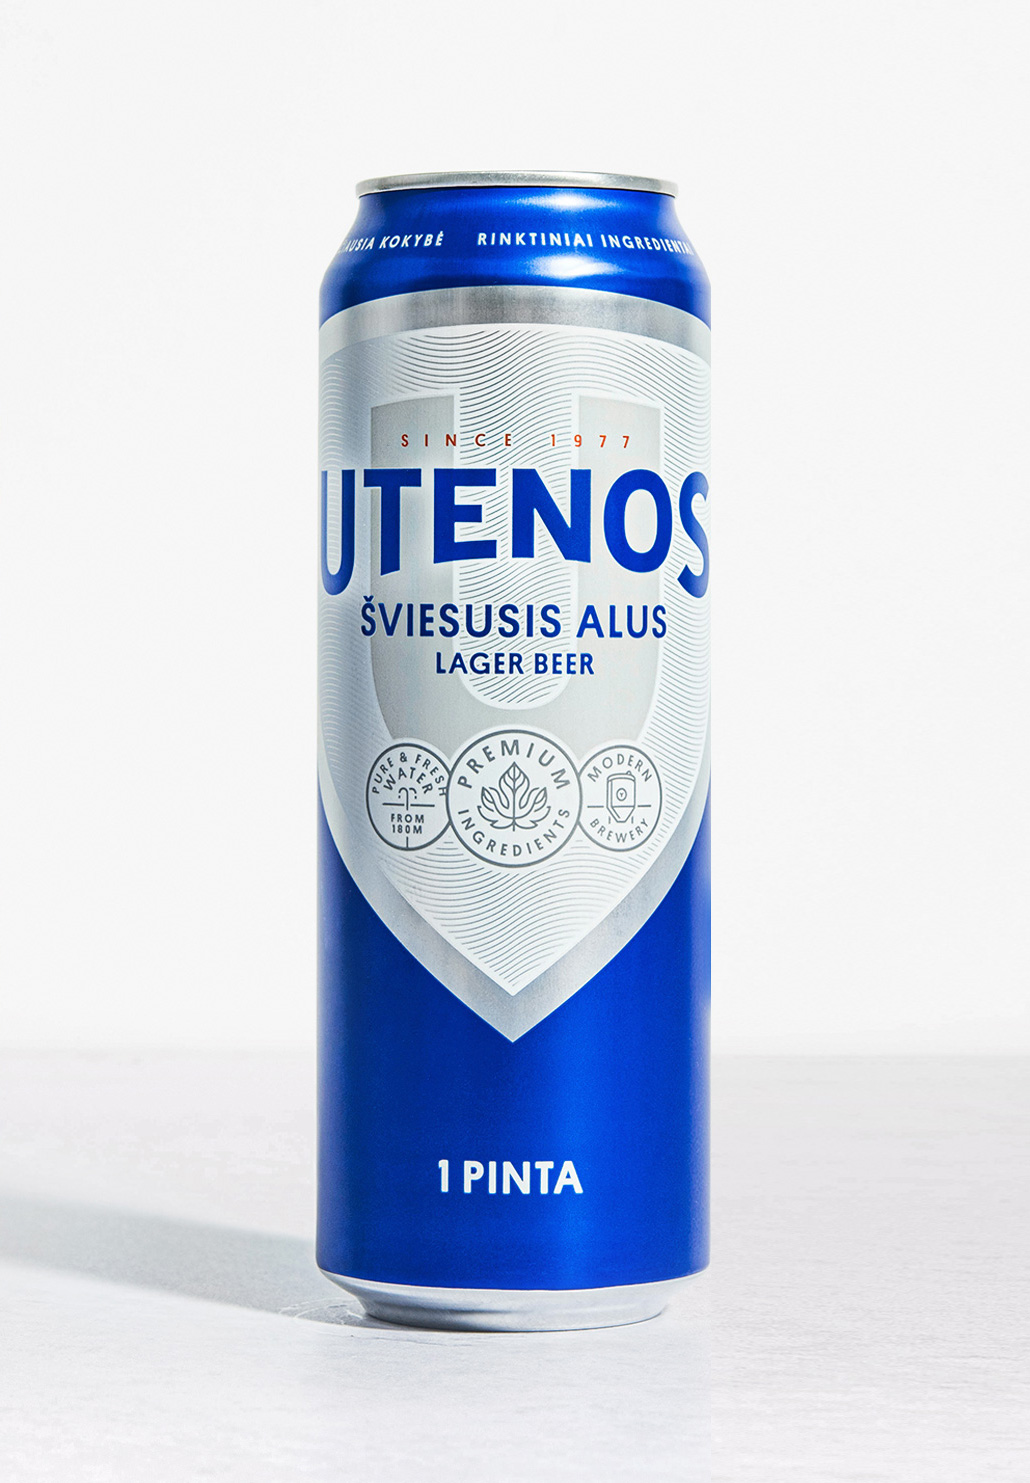 New Logo and Packaging for Utenos Alus by étiquette